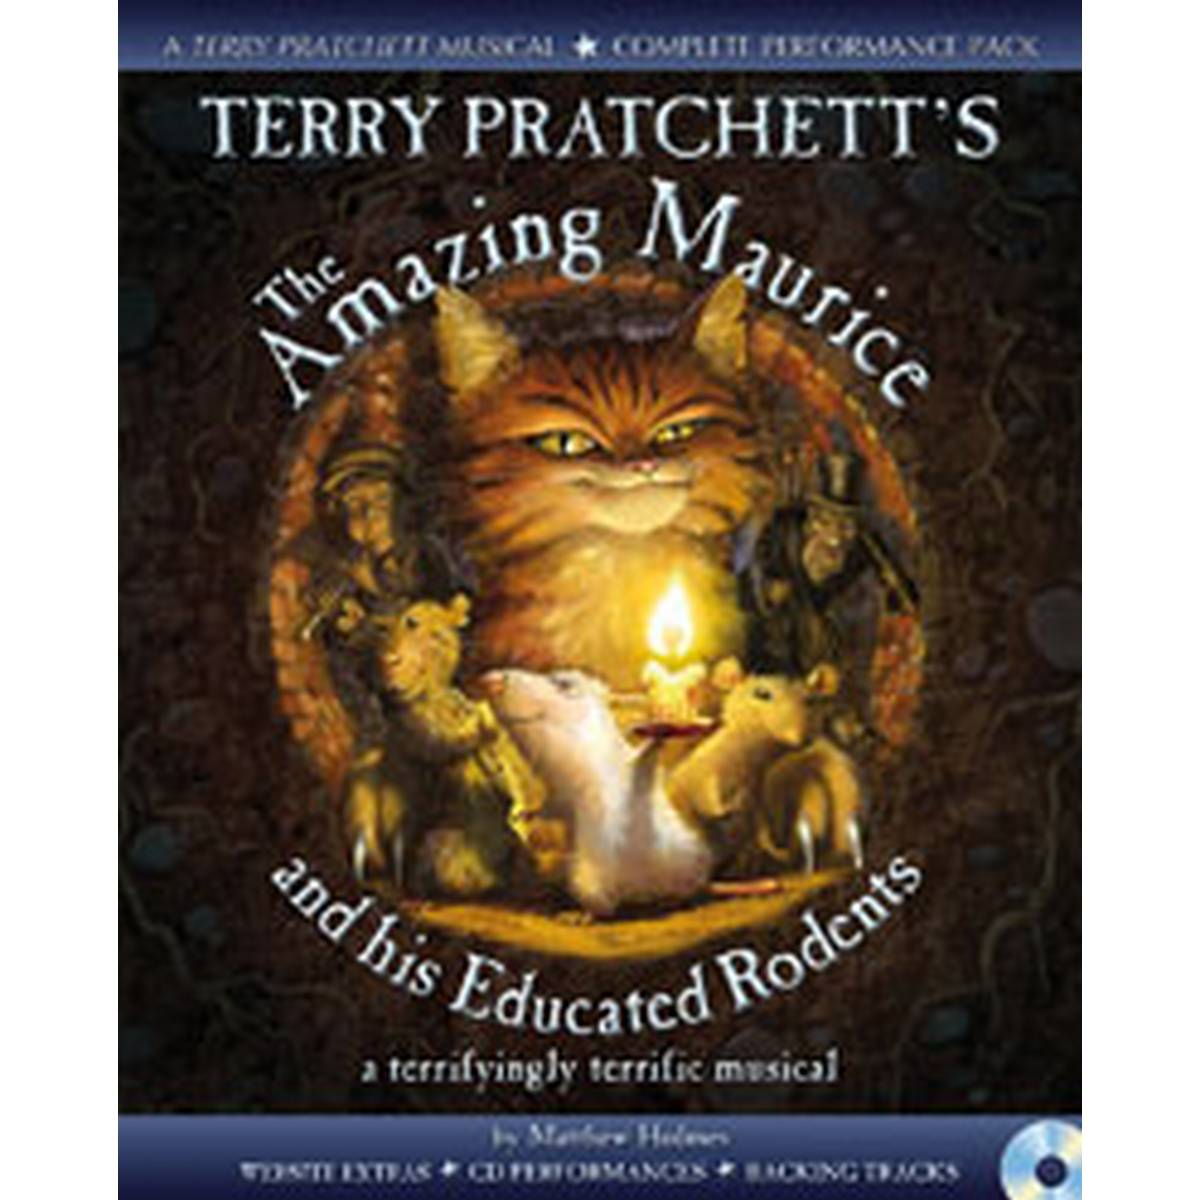 Terry Pratchett's The Amazing Maurice & his Educated Rodents